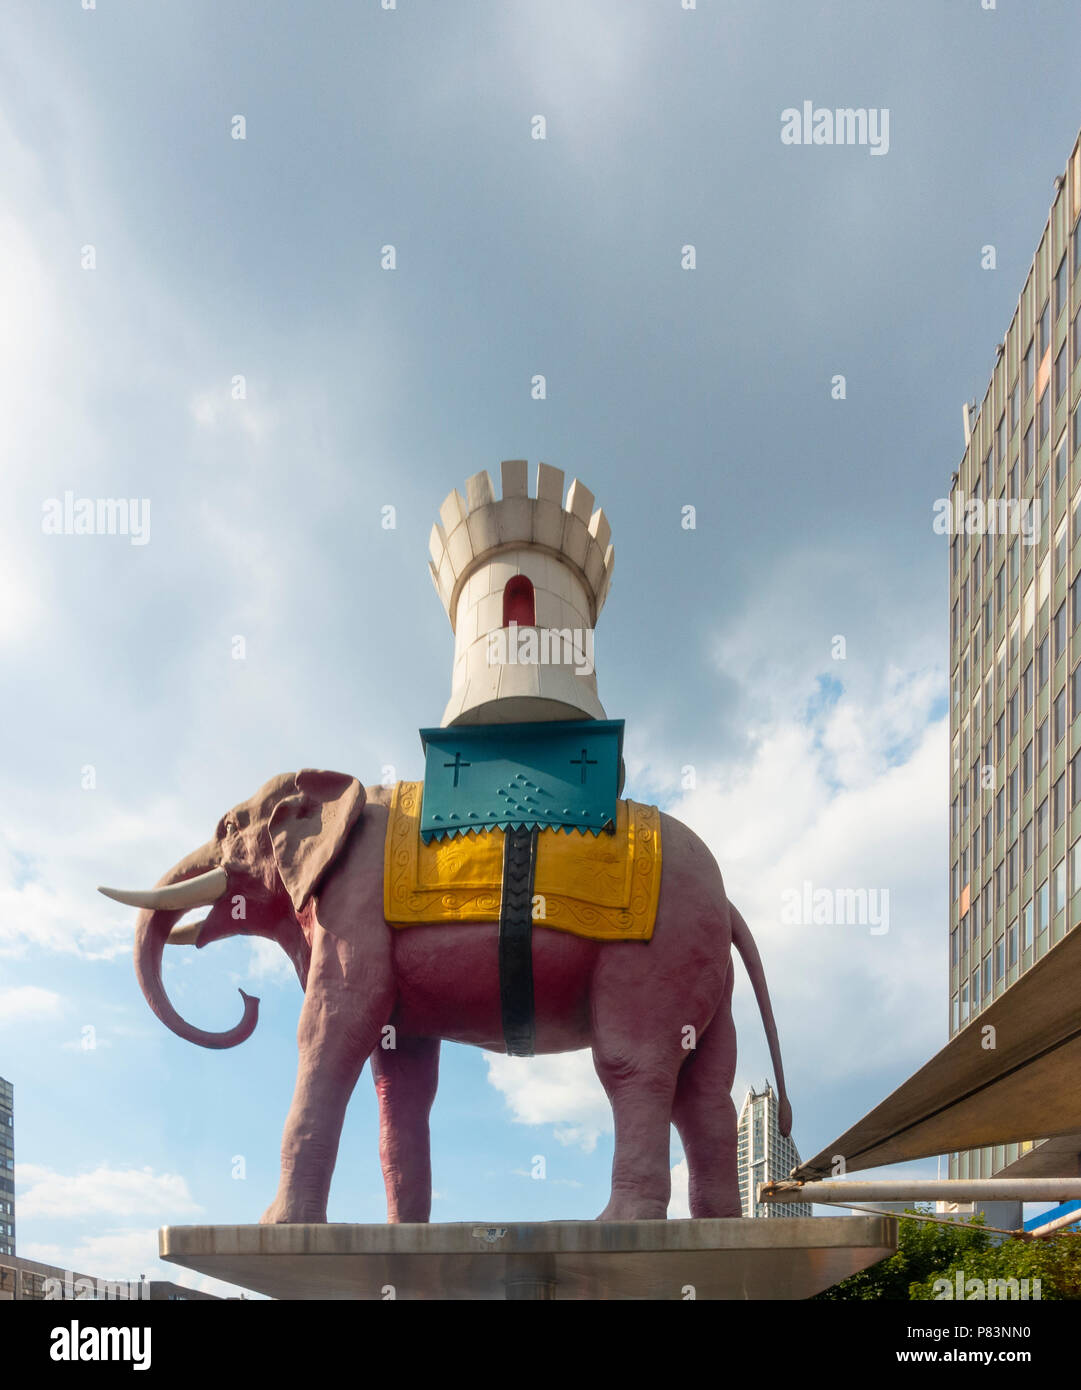 Farewell to the Elephant and Castle Shopping Centre 